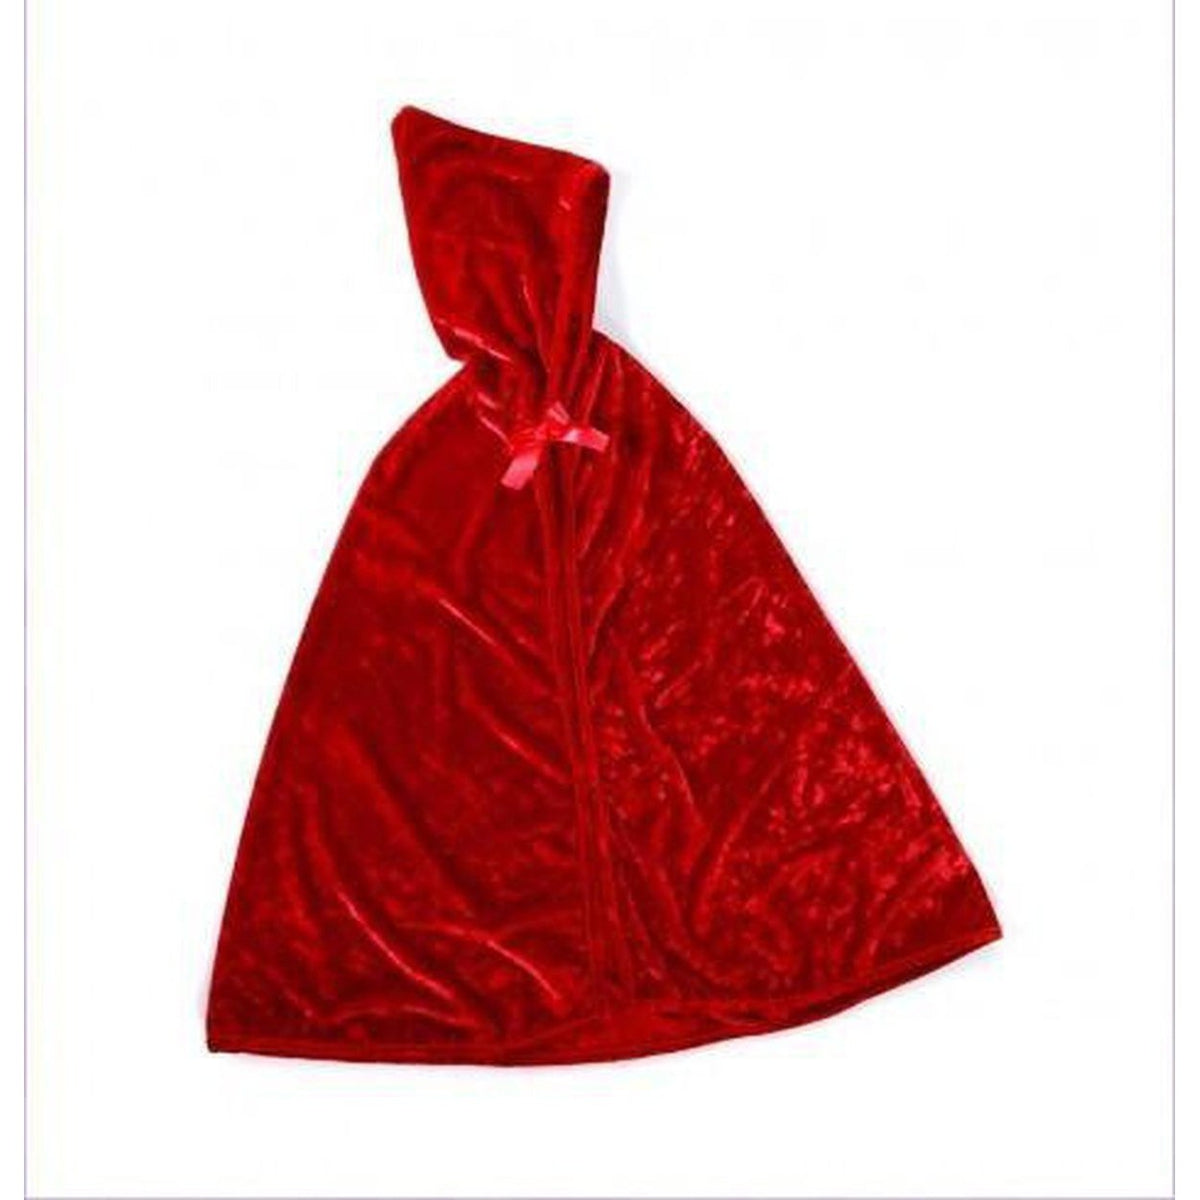 Little Red Riding Hood cape-dress up-Edufun - Creative Education-Dilly Dally Kids